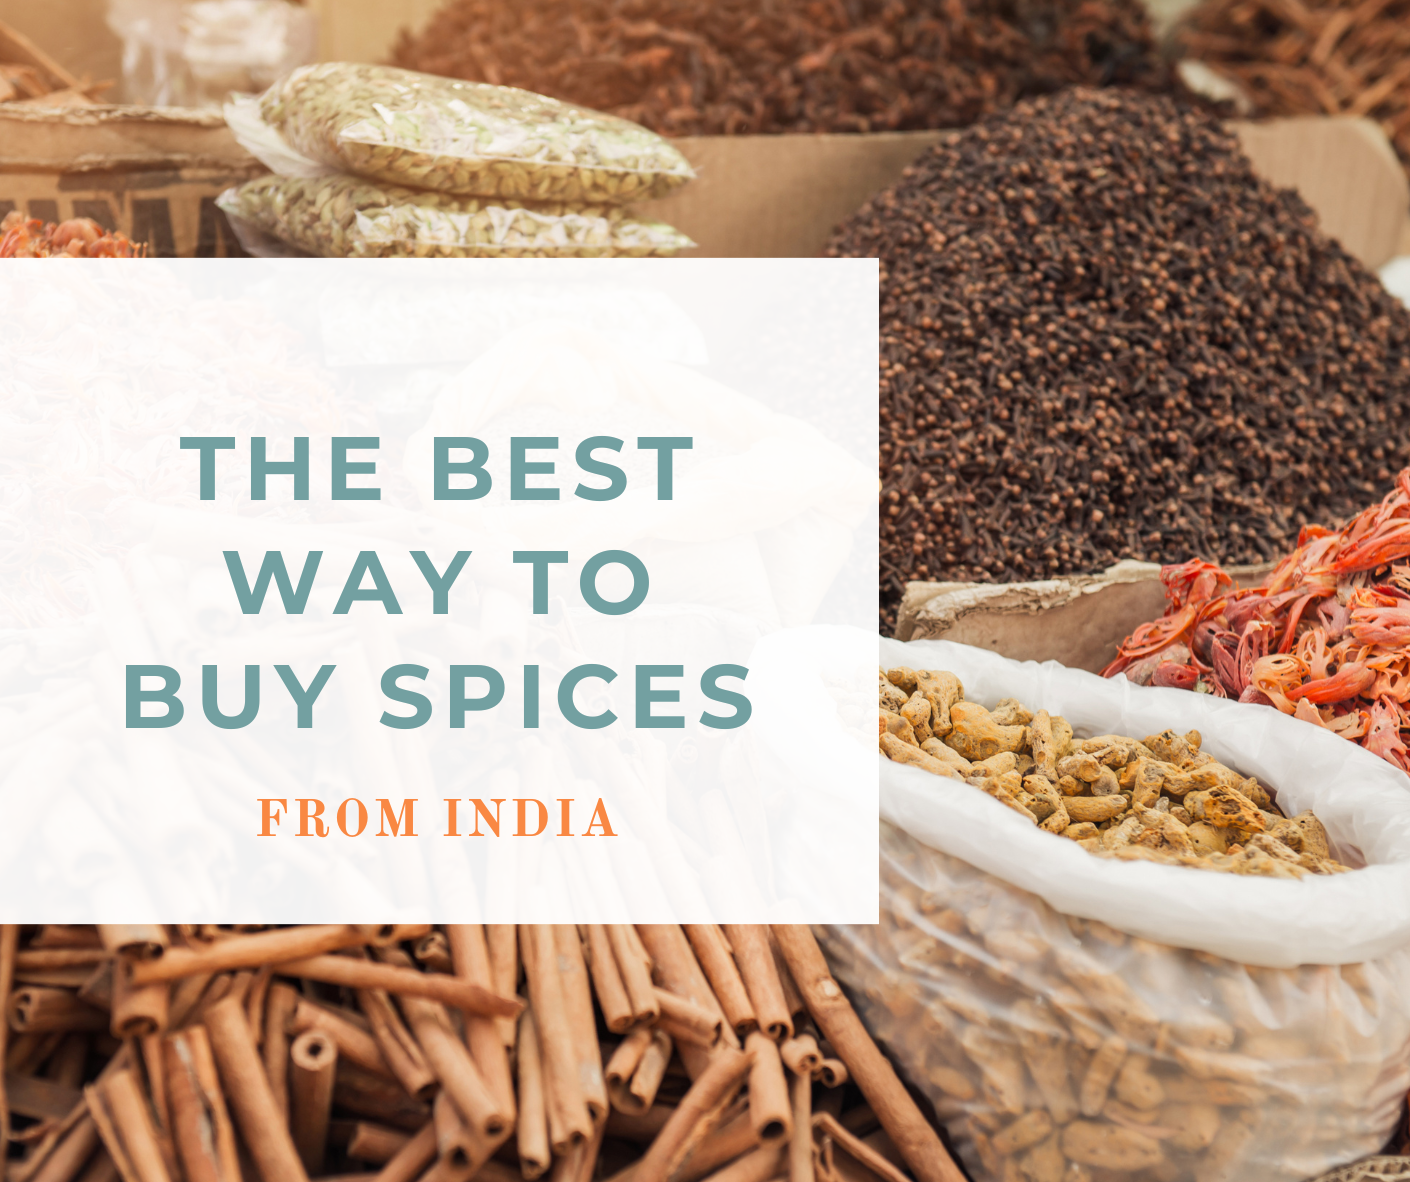 Which is the best way to buy spices from India?